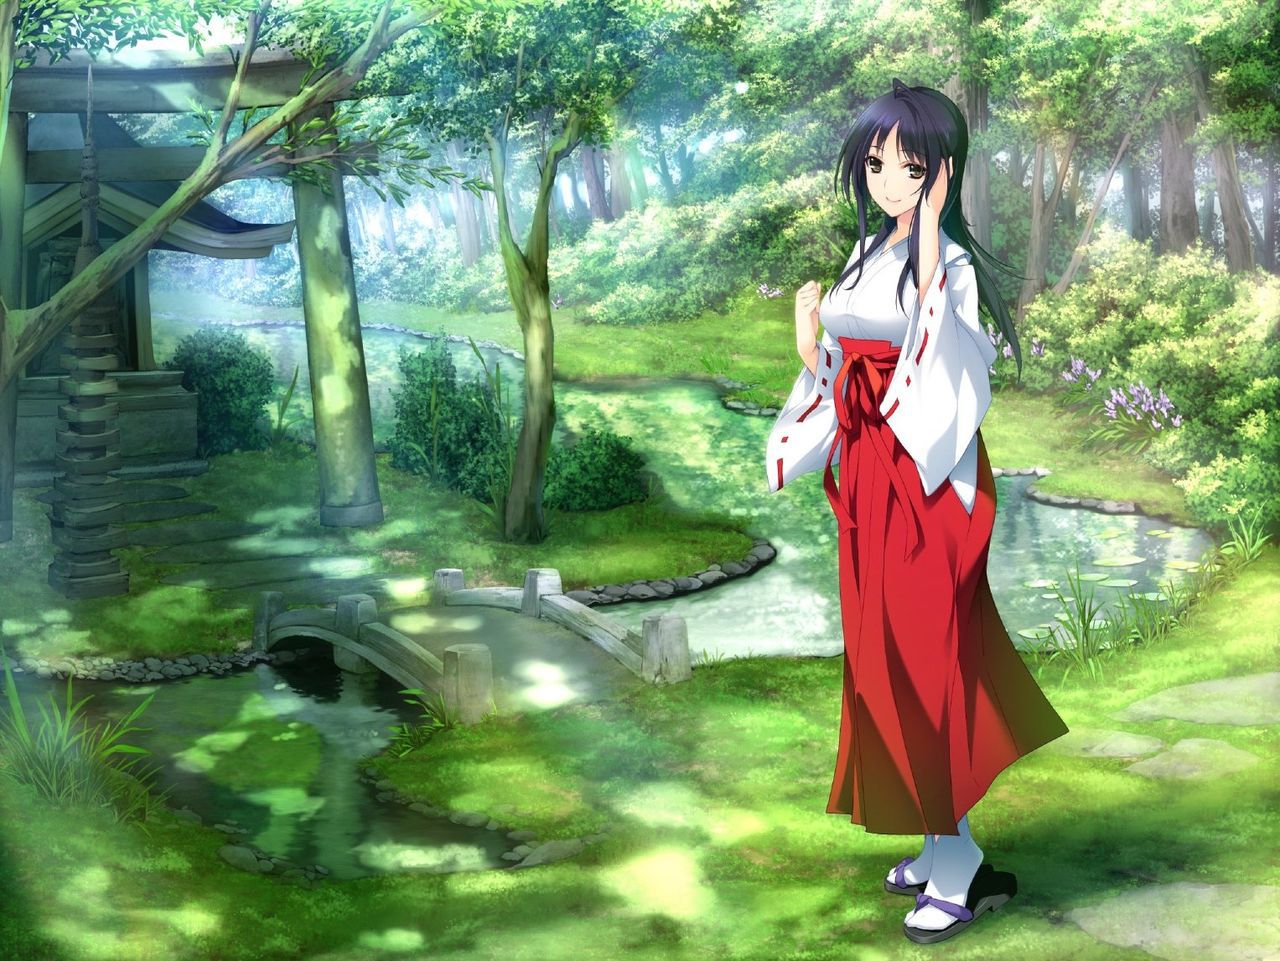 You want to see images of shrine maidens, right? 13